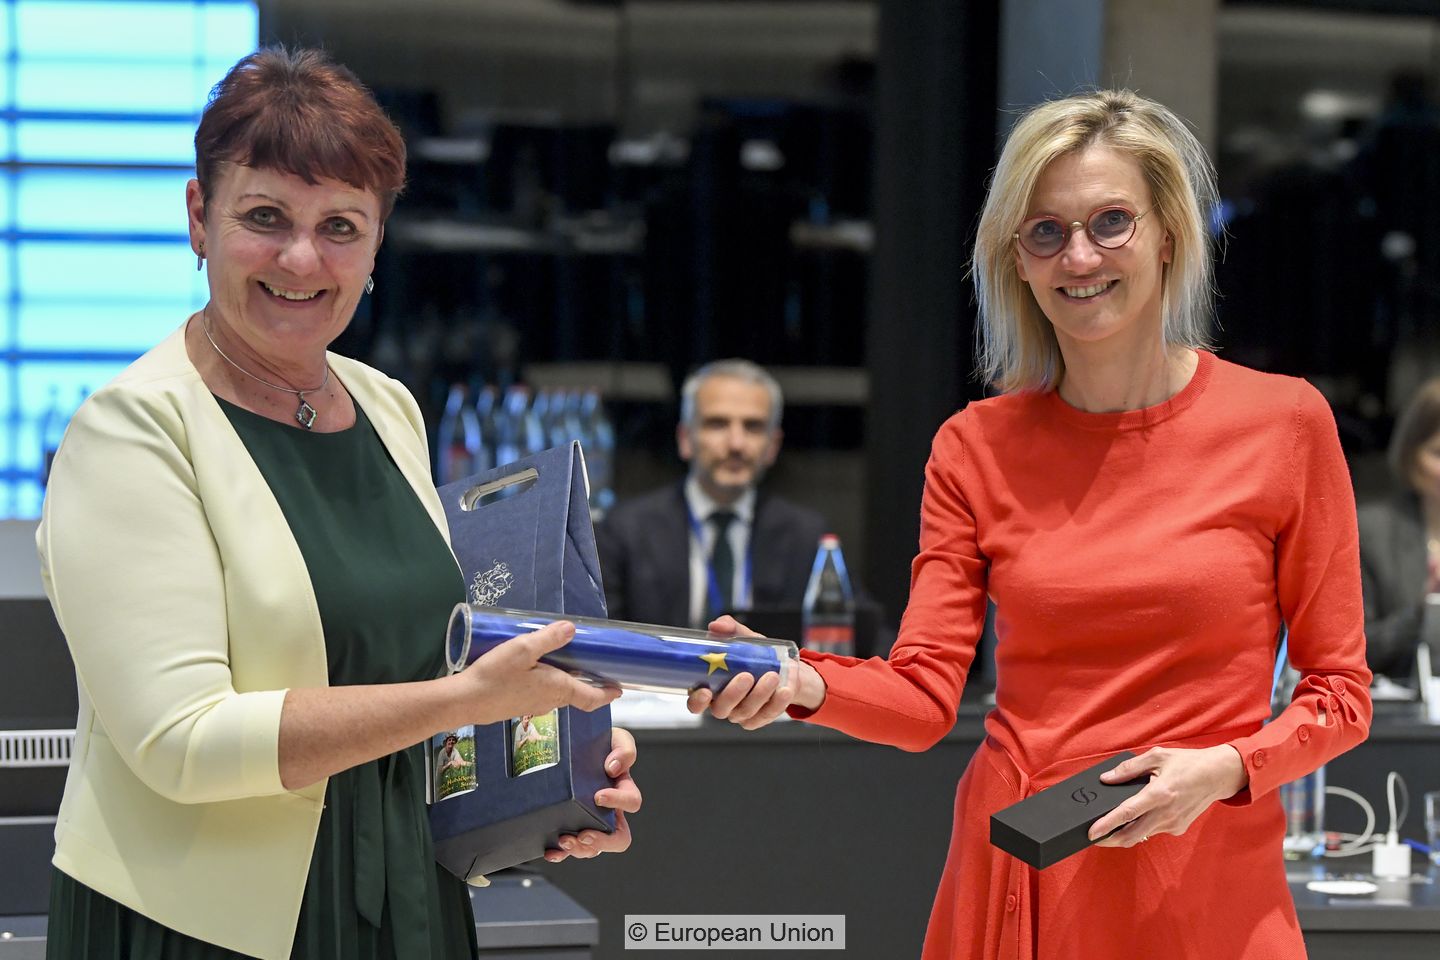 Anna Hubáčková (left) and Agnès Pannier-Runacher at handover ceremony in the Environment Council at the start of the Czech Council Presidency